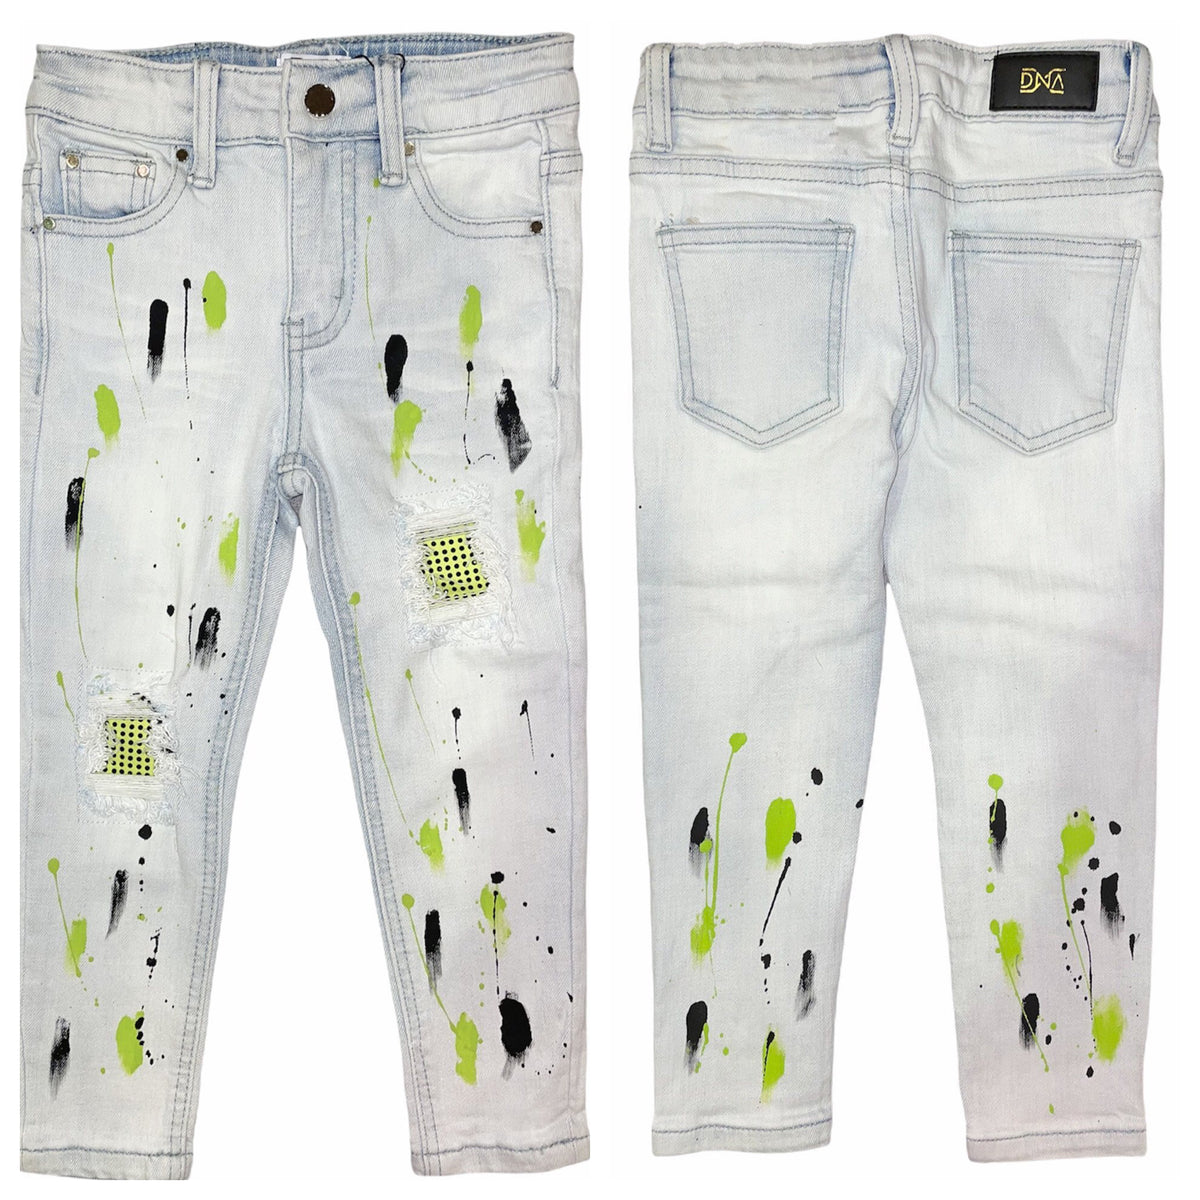 Kids Dna Stone & Paint Jeans-Green/Black